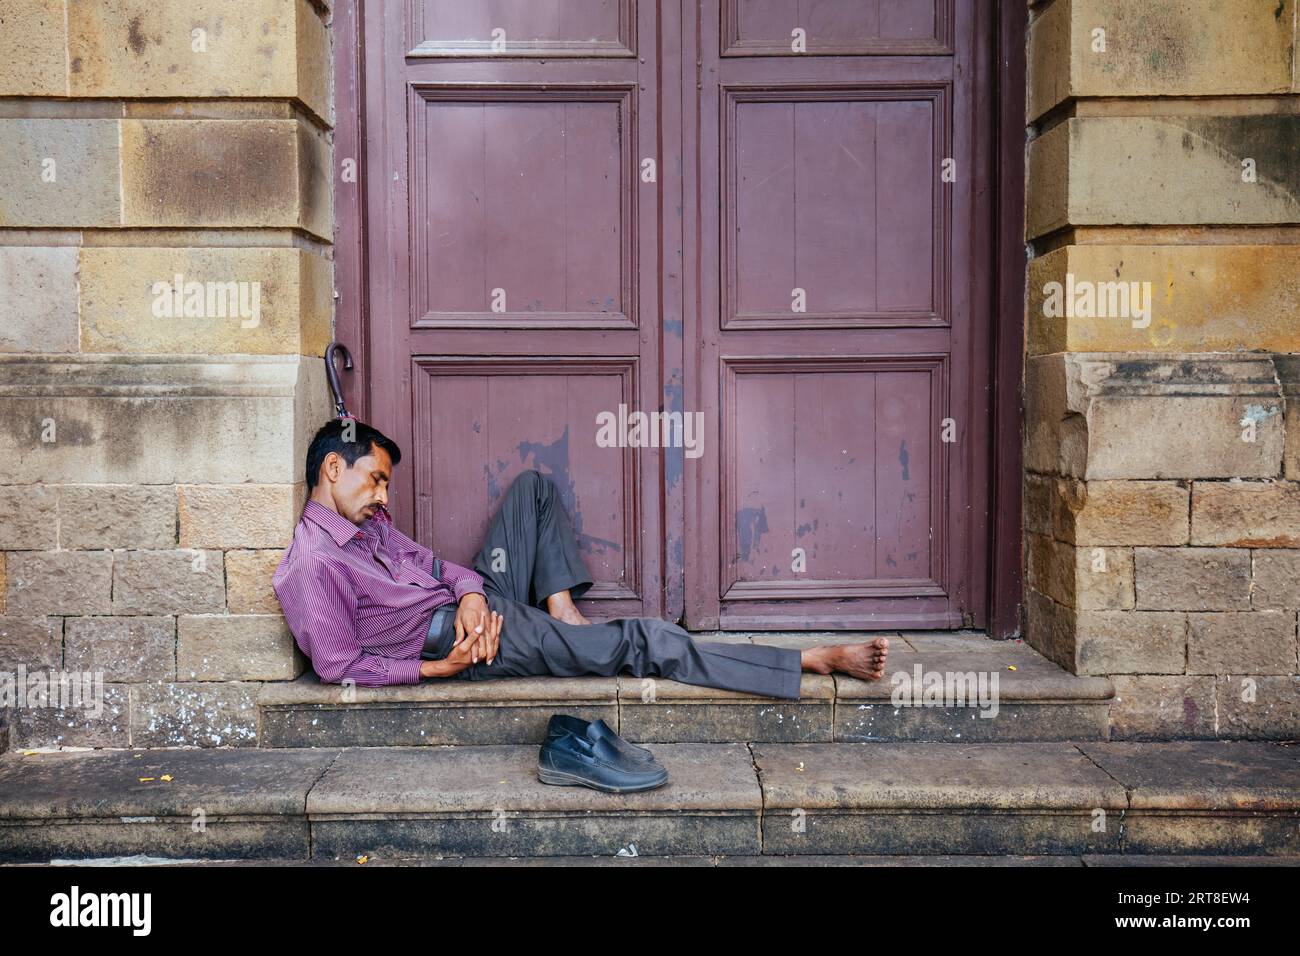 Mumbai, India, August 5 2017: A man has a quick sleep on some building steps on a hot day in Colaba, Mumbai, India Stock Photo